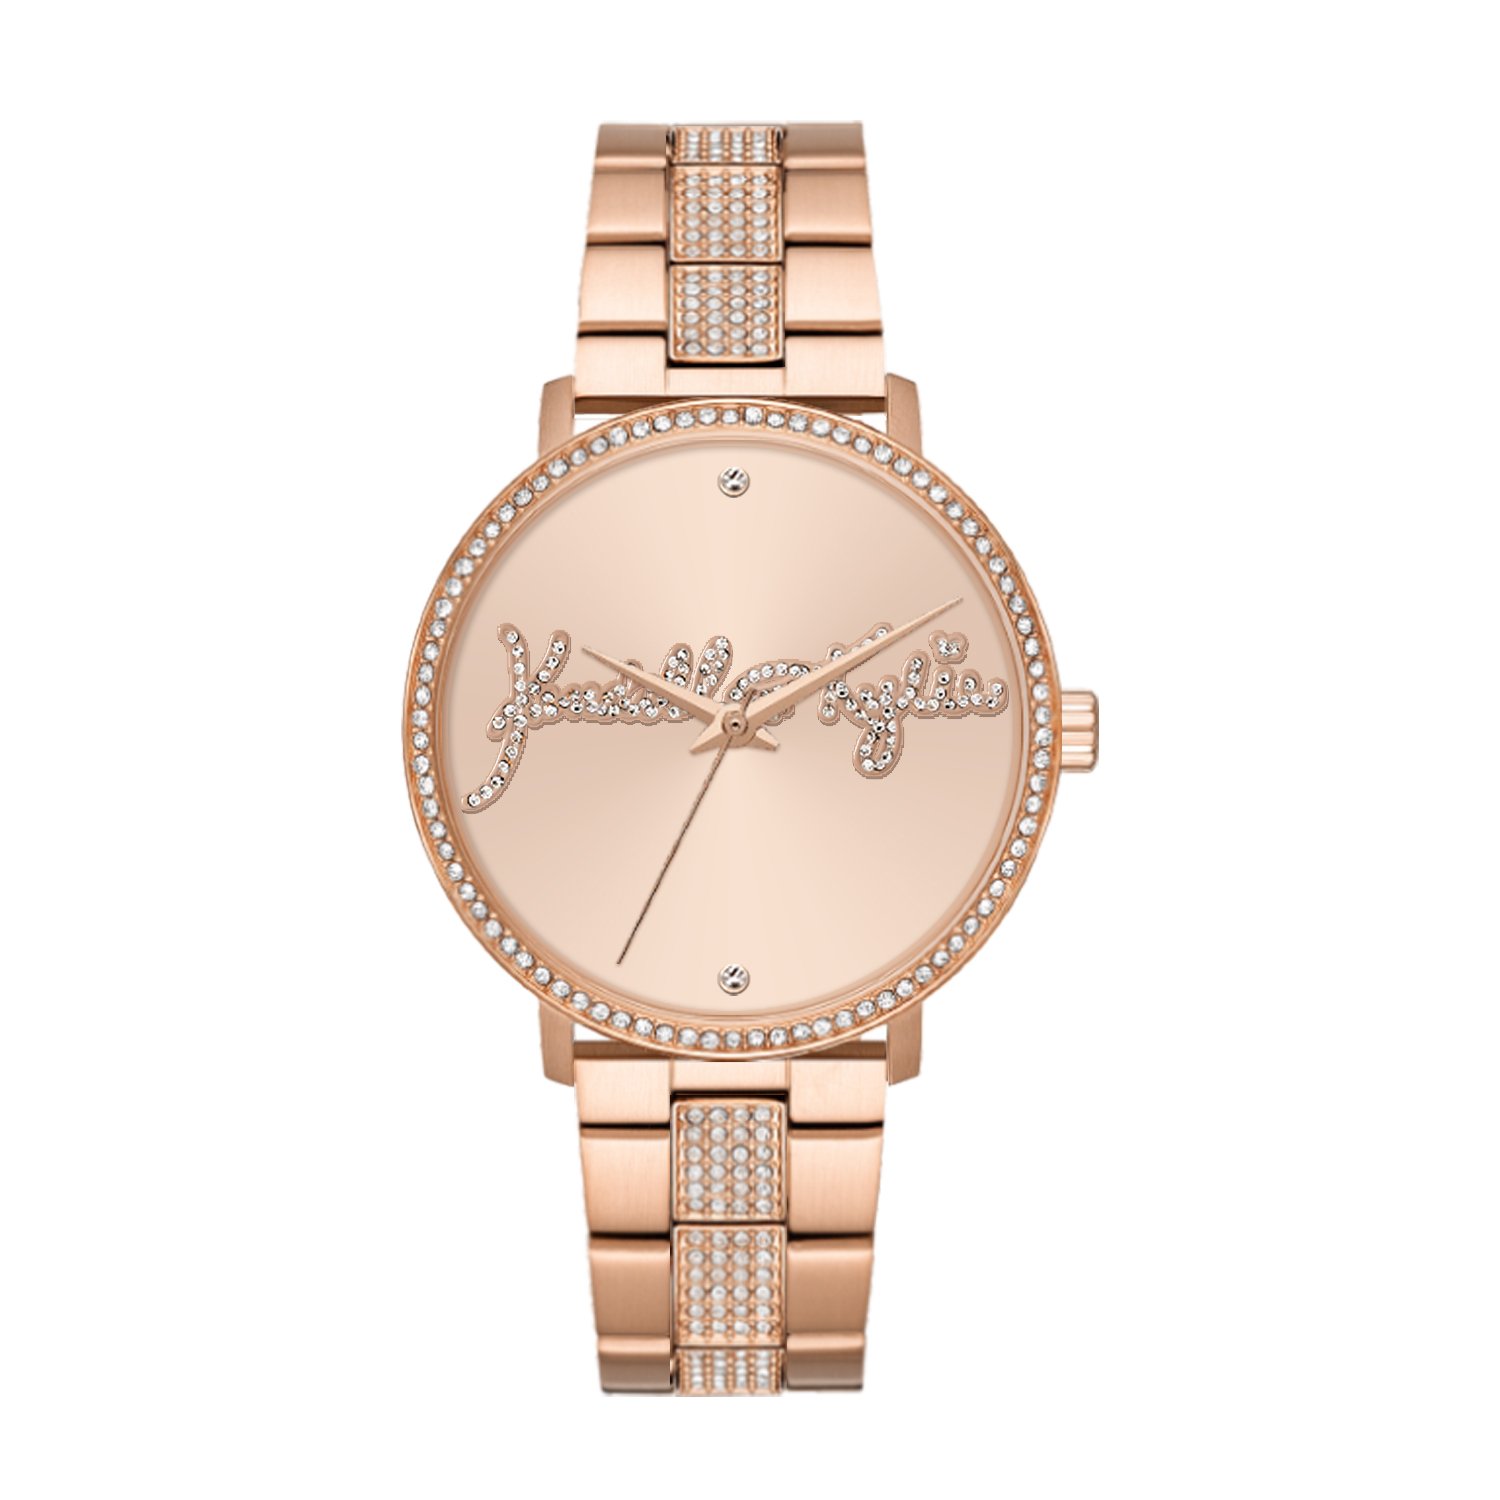 Kendall + Kylie Rose Gold Toned Metal Analog Watch with Bedazzled Logo - image 1 of 4